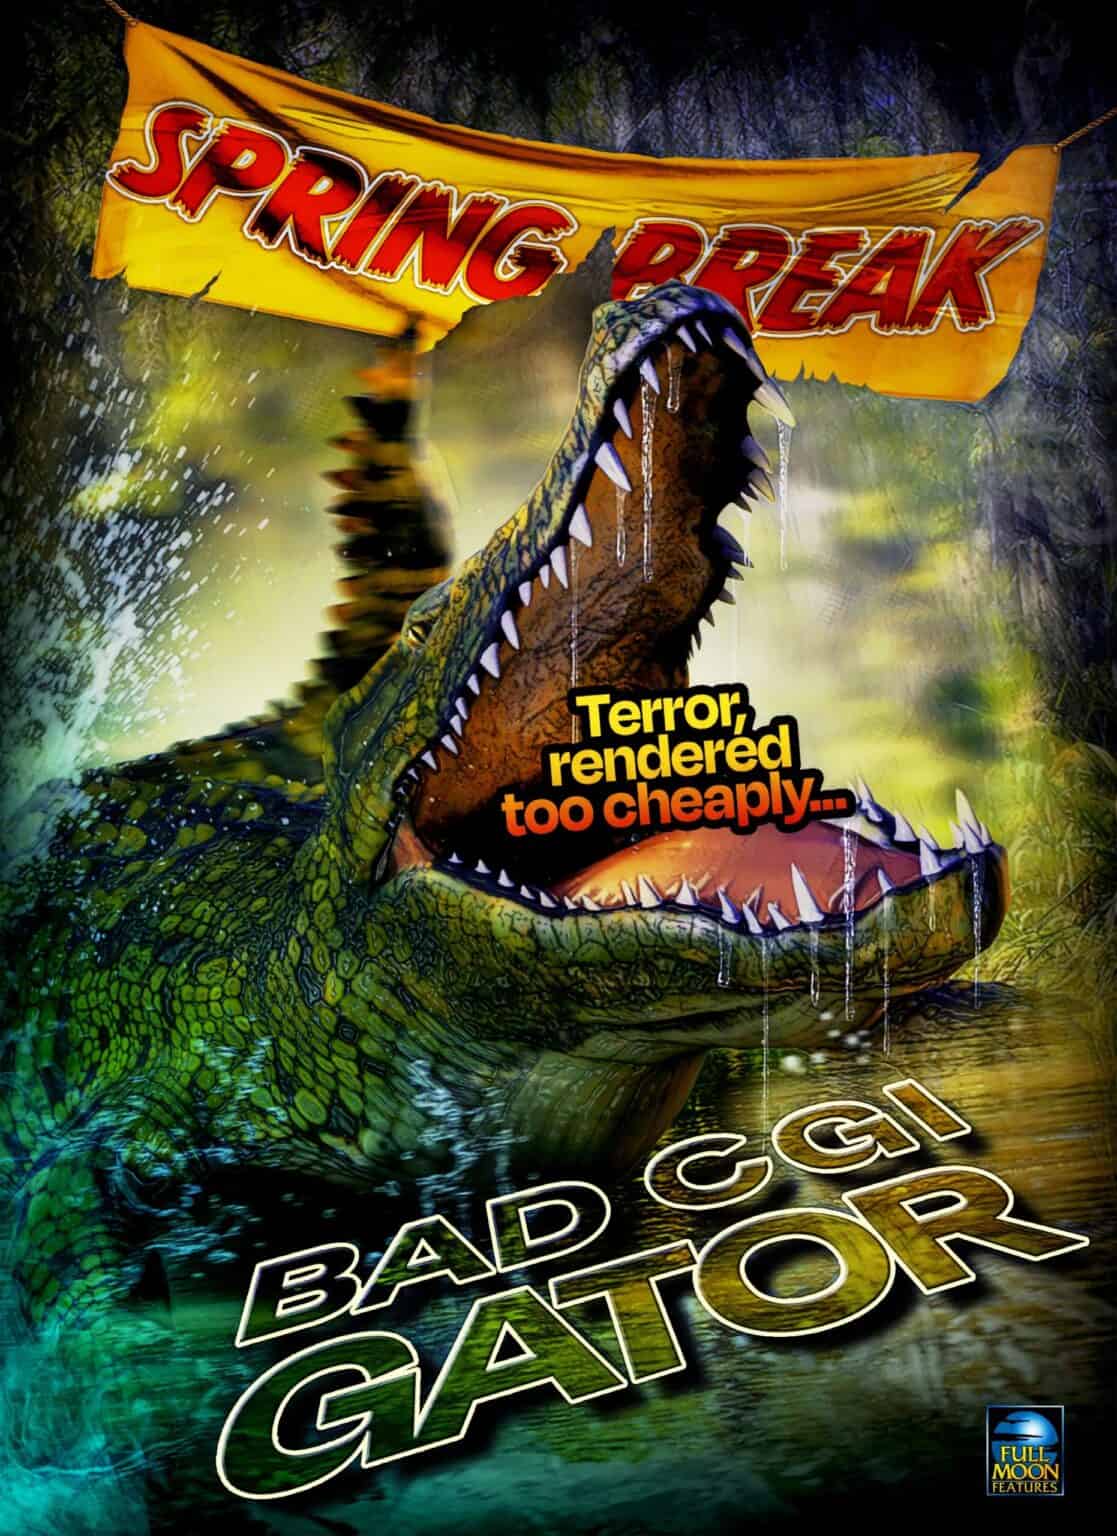 Bad CGI Gator trailer: Full Moon horror comedy starts streaming this month